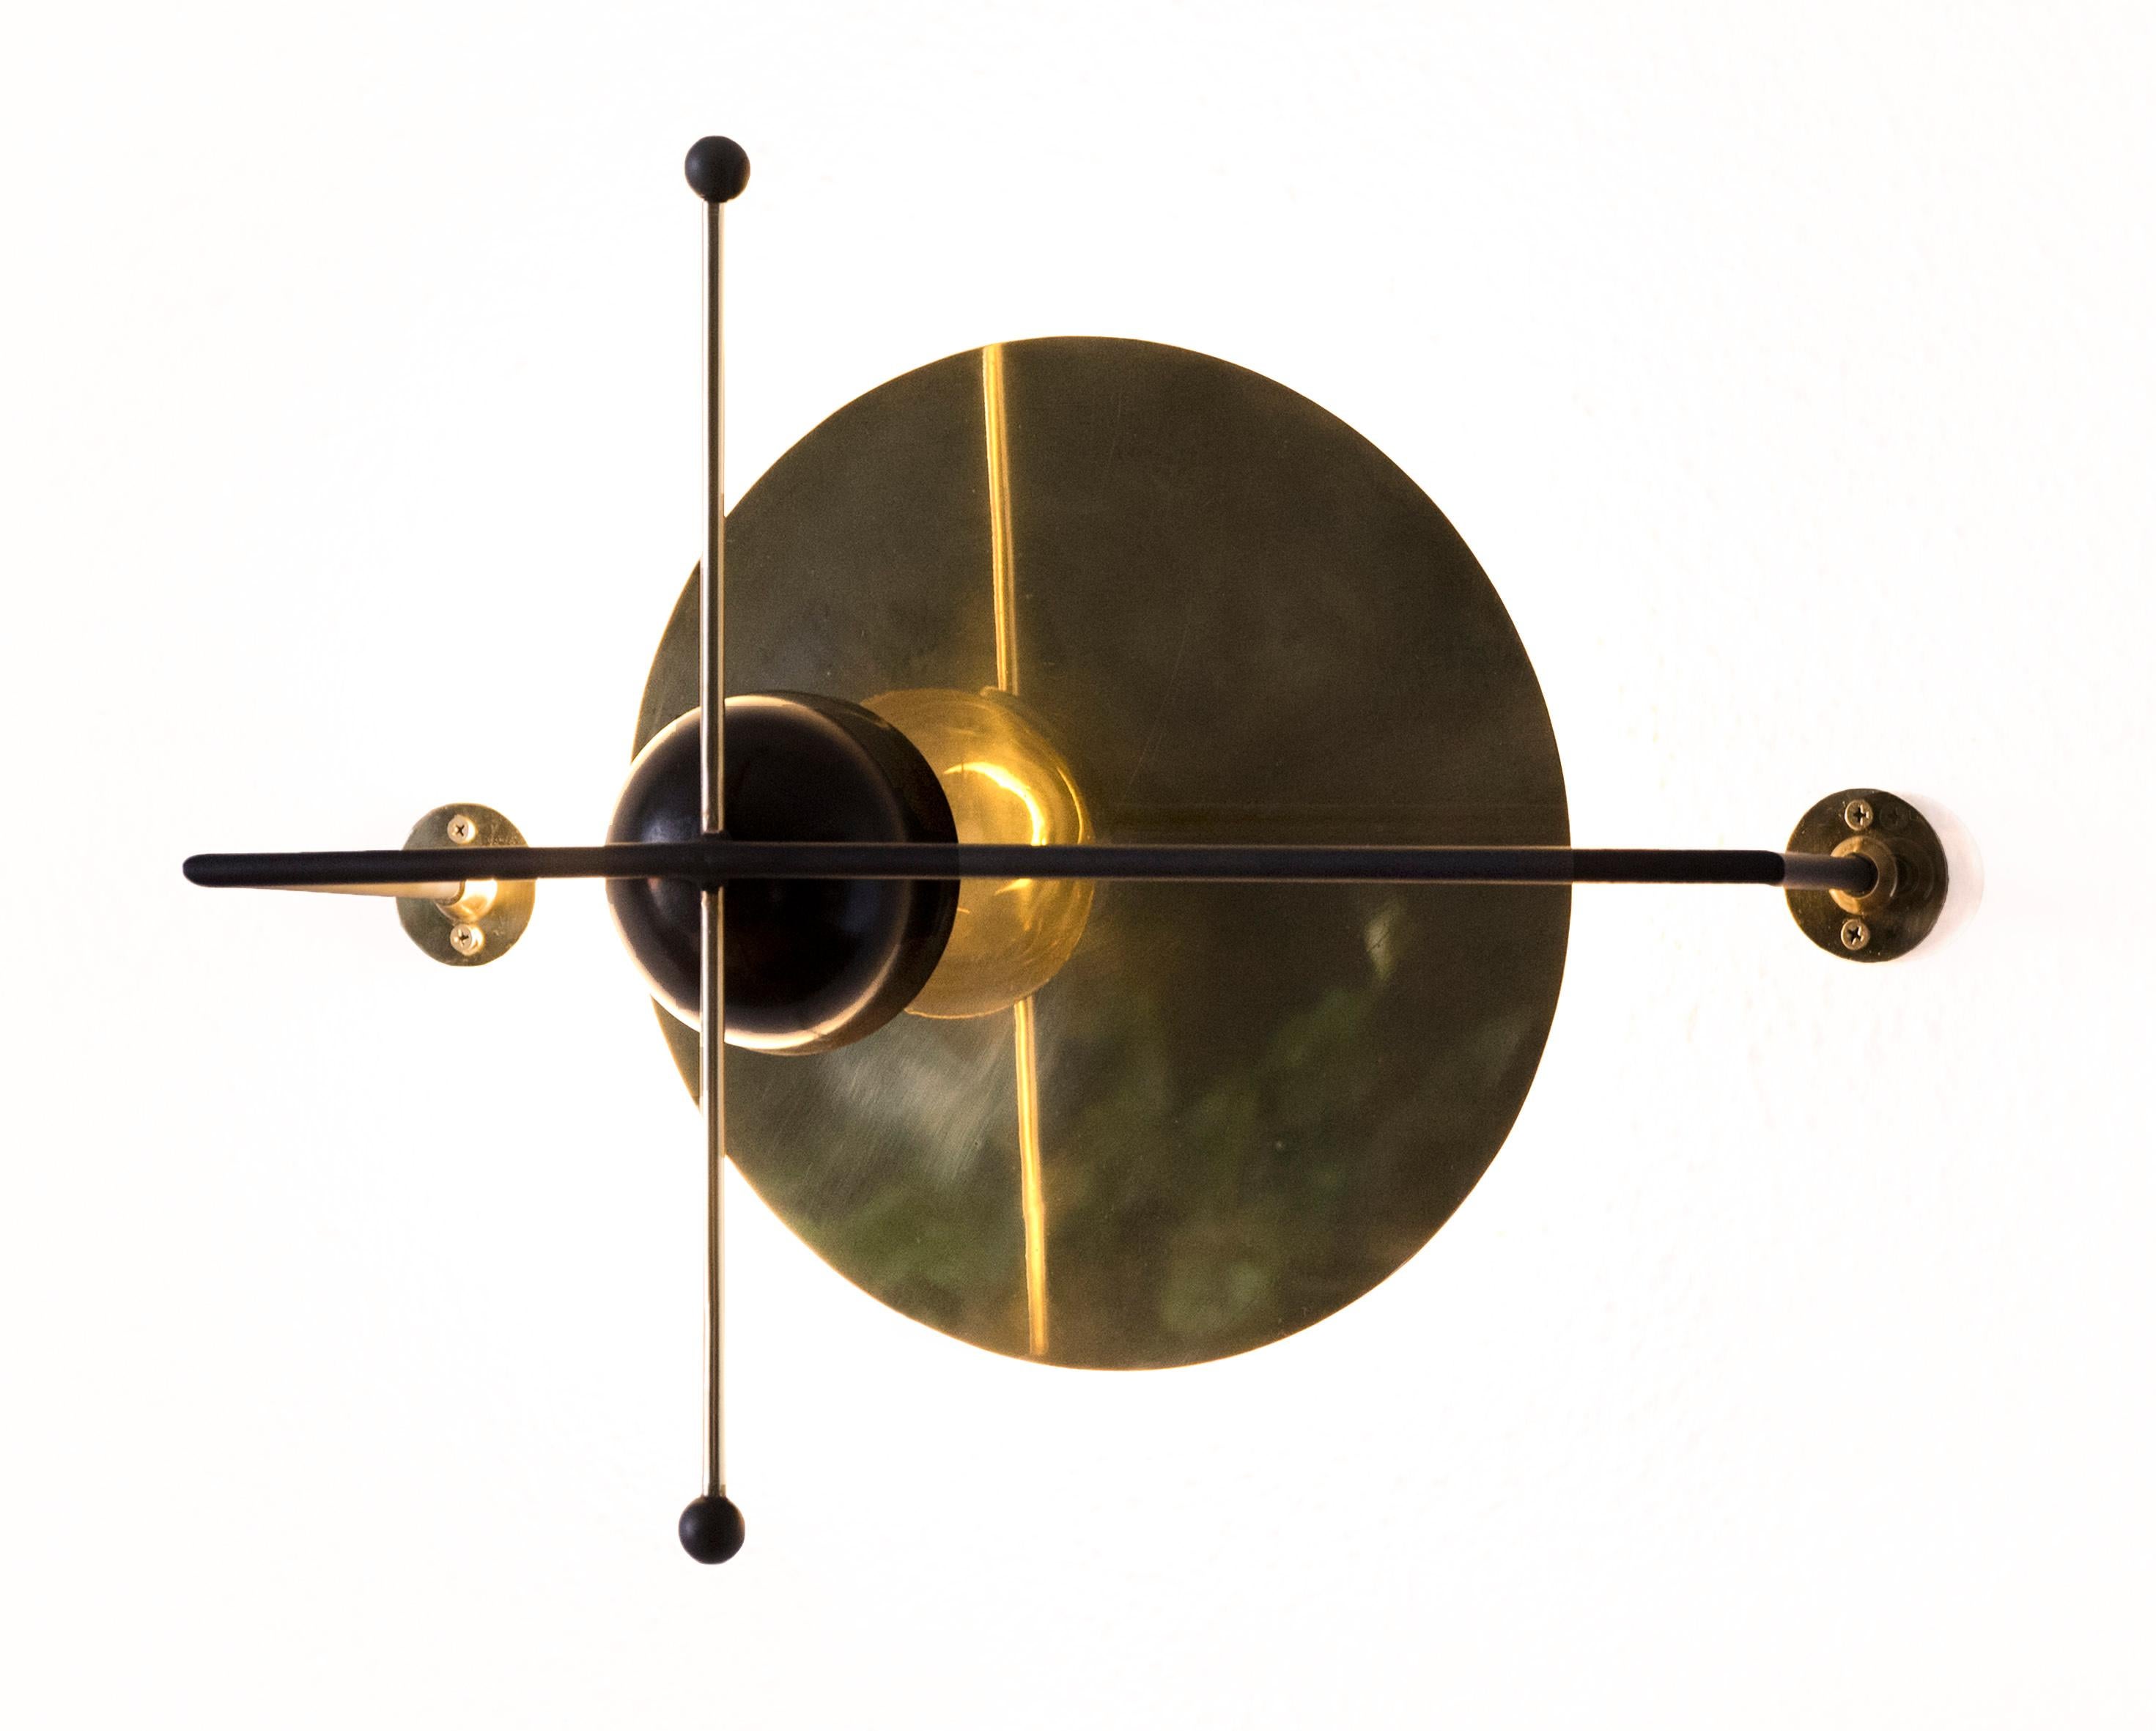 Eclipse lamp by Nomade Atelier
Dimensions: D35 x H17 cm
Material: Brass, LED Lighting.
Weight: 10 kg

All our lamps can be wired according to each country. If sold to the USA it will be wired for the USA for instance.

Nomade Atelier pays